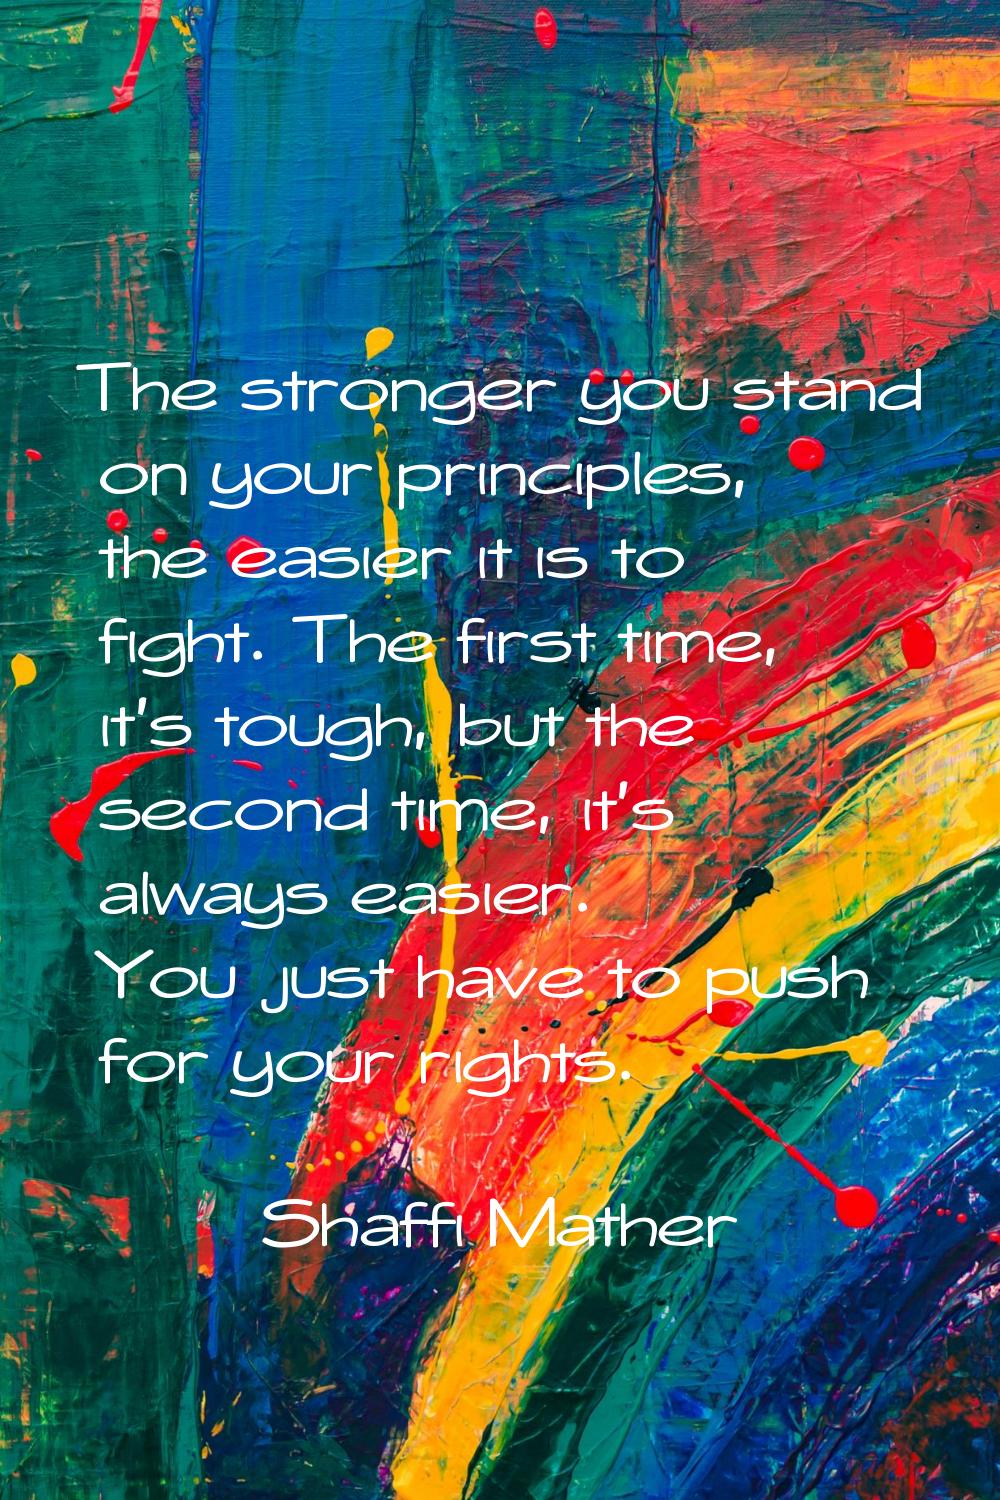 The stronger you stand on your principles, the easier it is to fight. The first time, it's tough, b